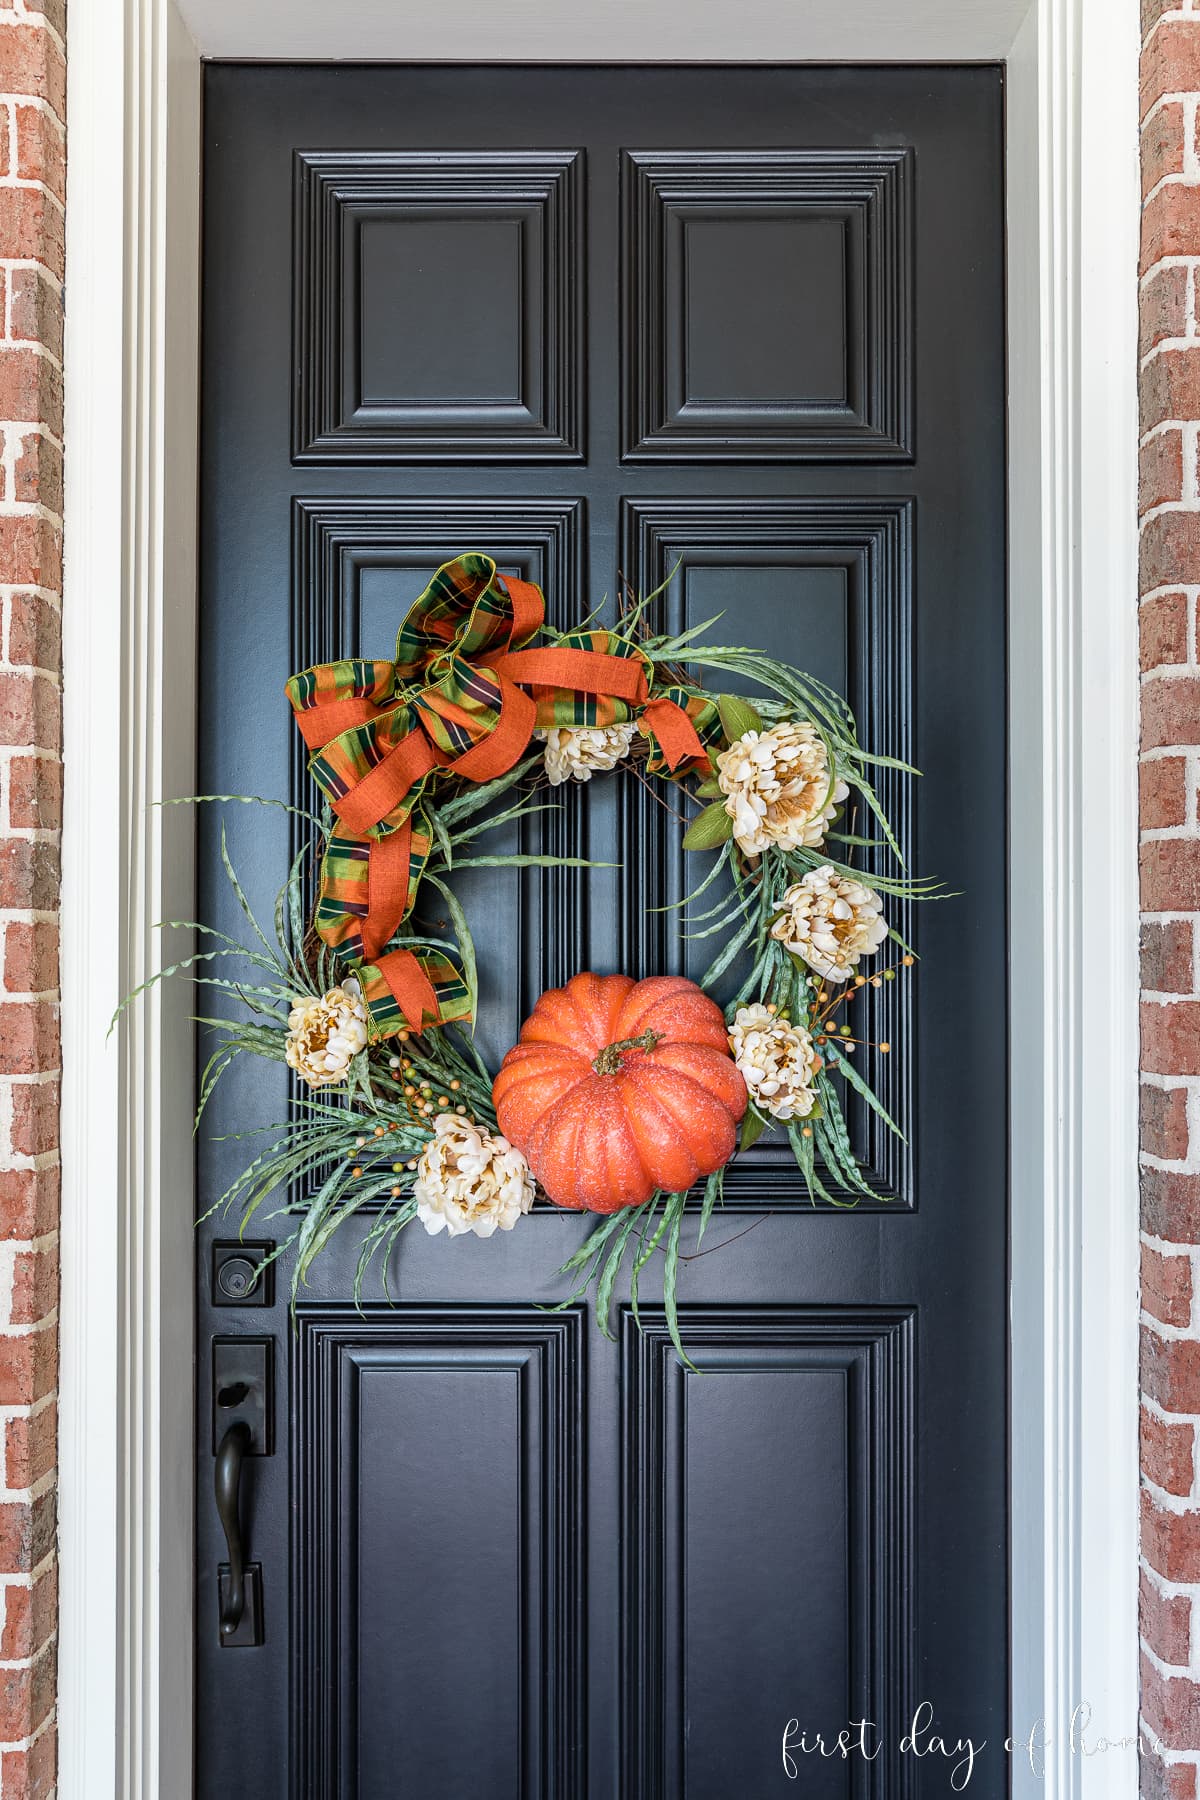 Closeup view of DIY fall grapevine wreath on front door.